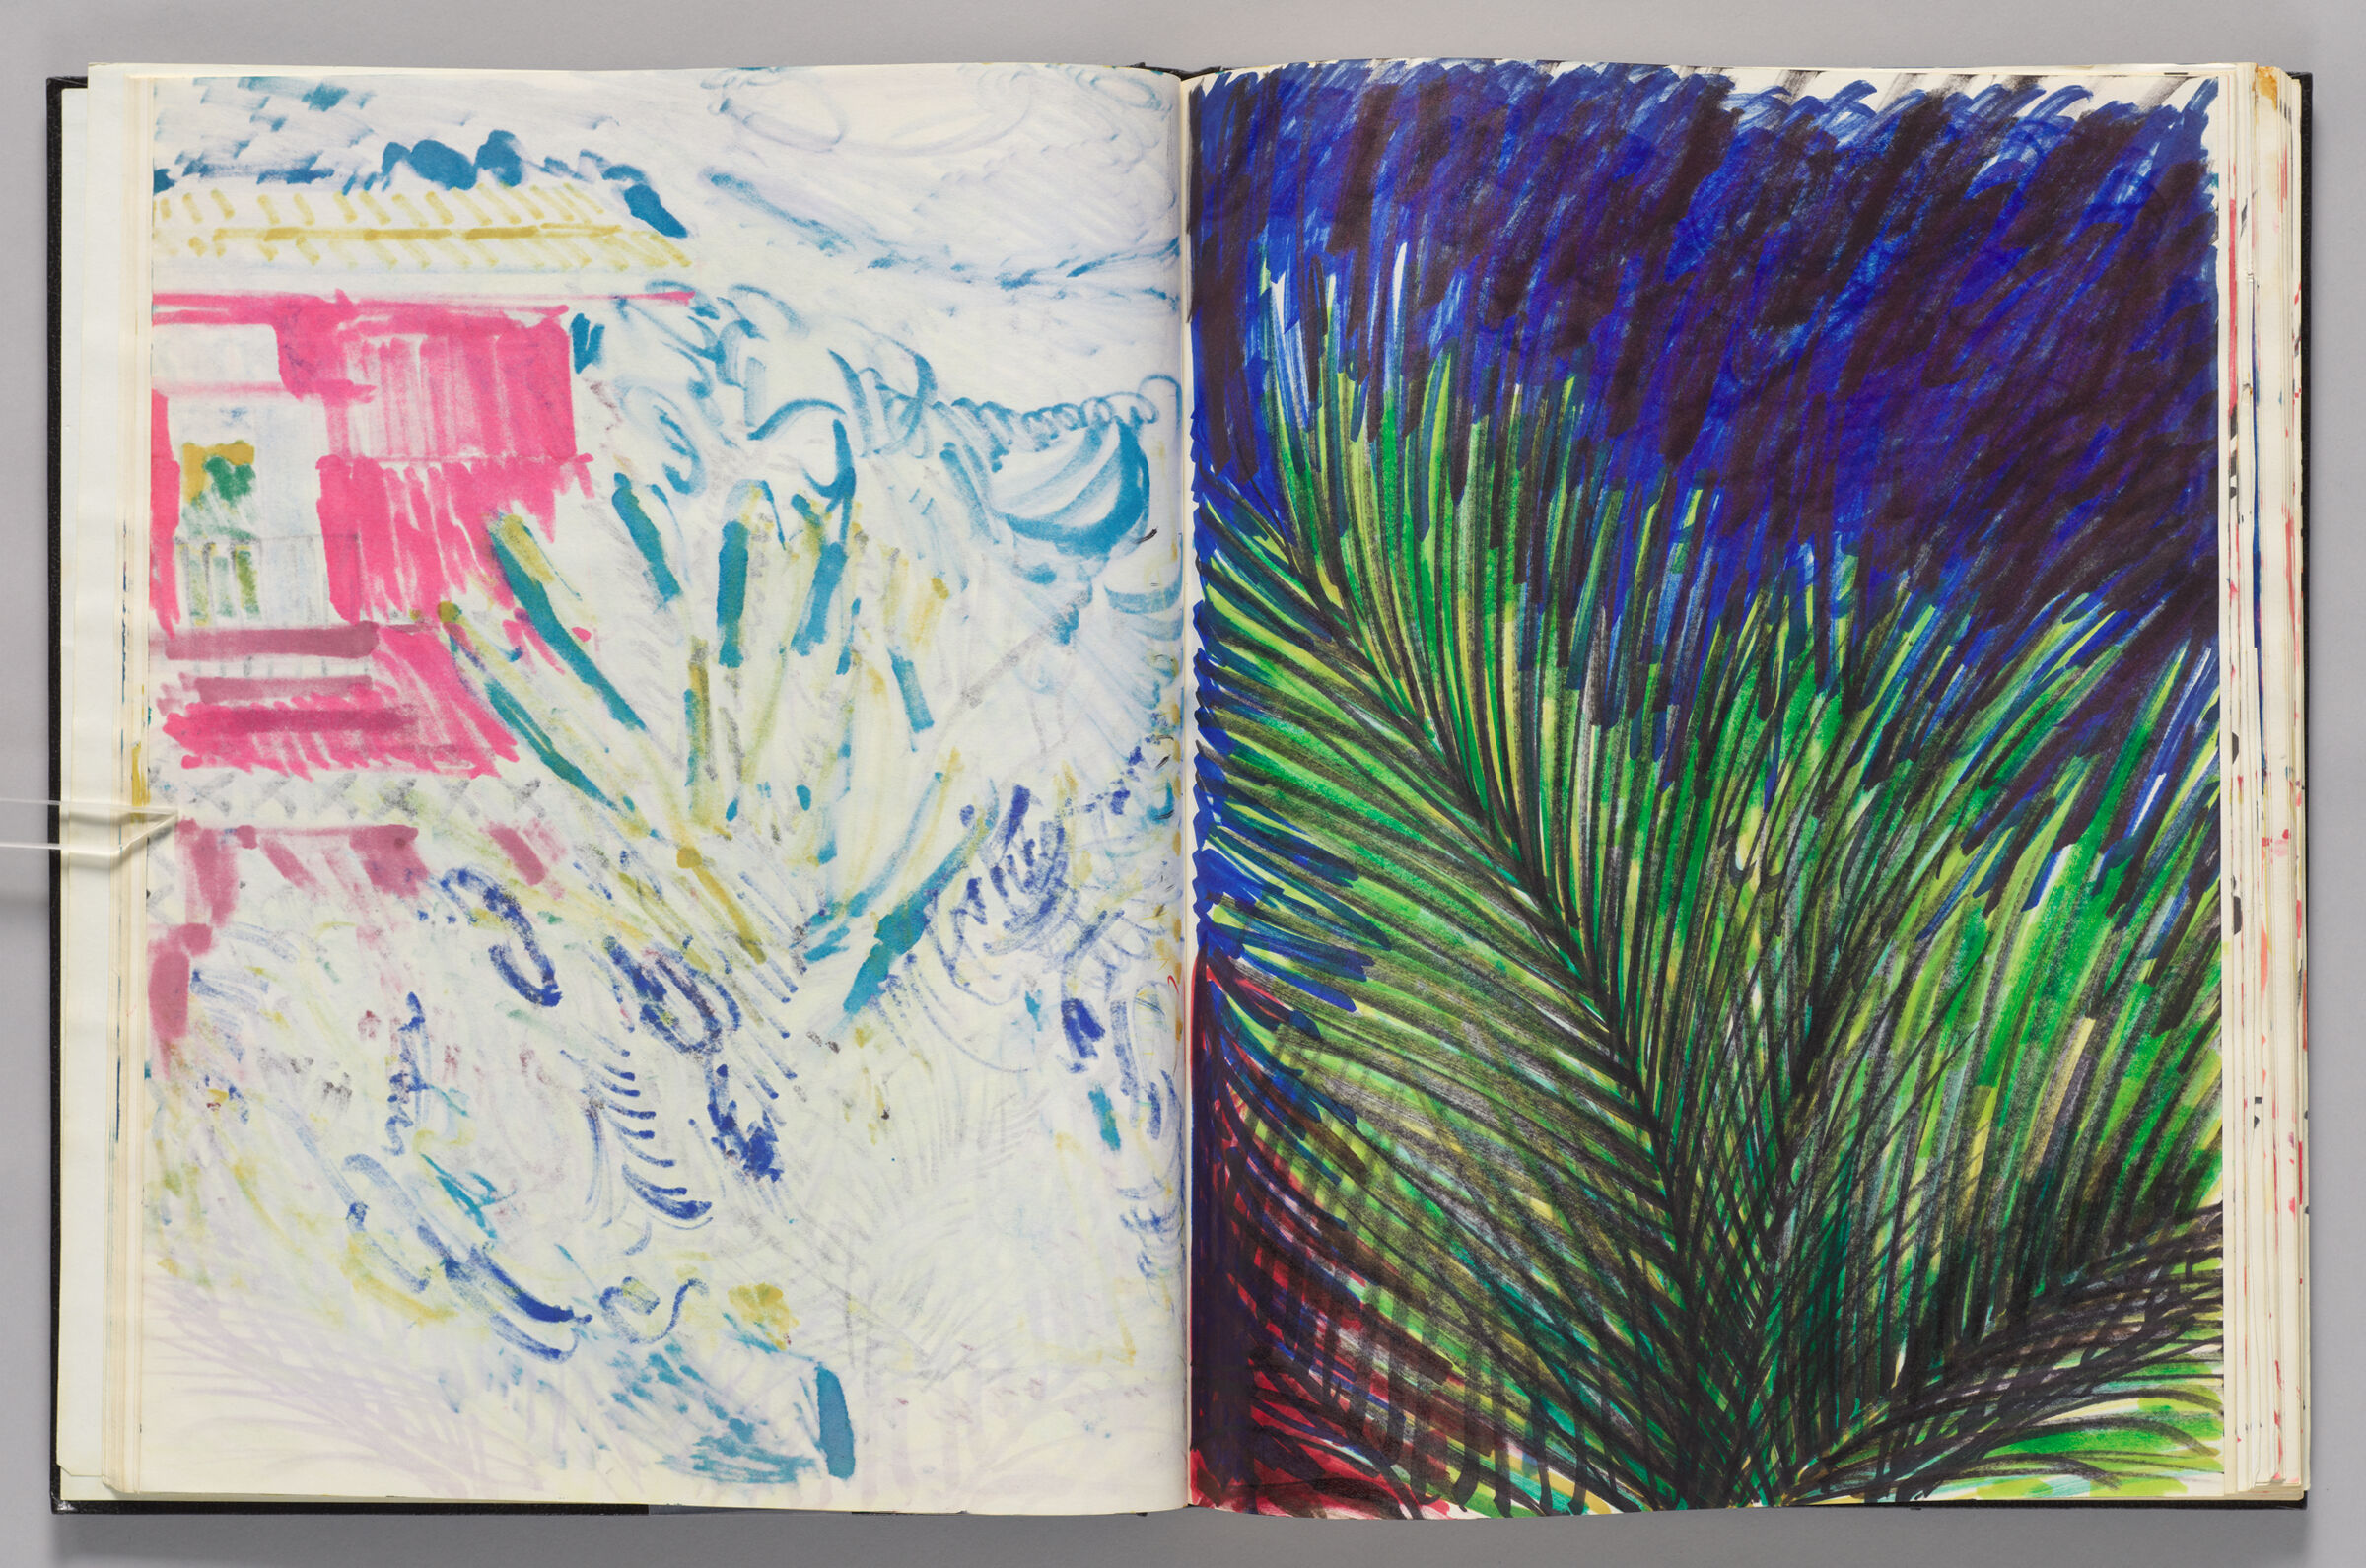 Untitled (Bleed-Through Of Previous Page, Left Page); Untitled (Foliage, Right Page)